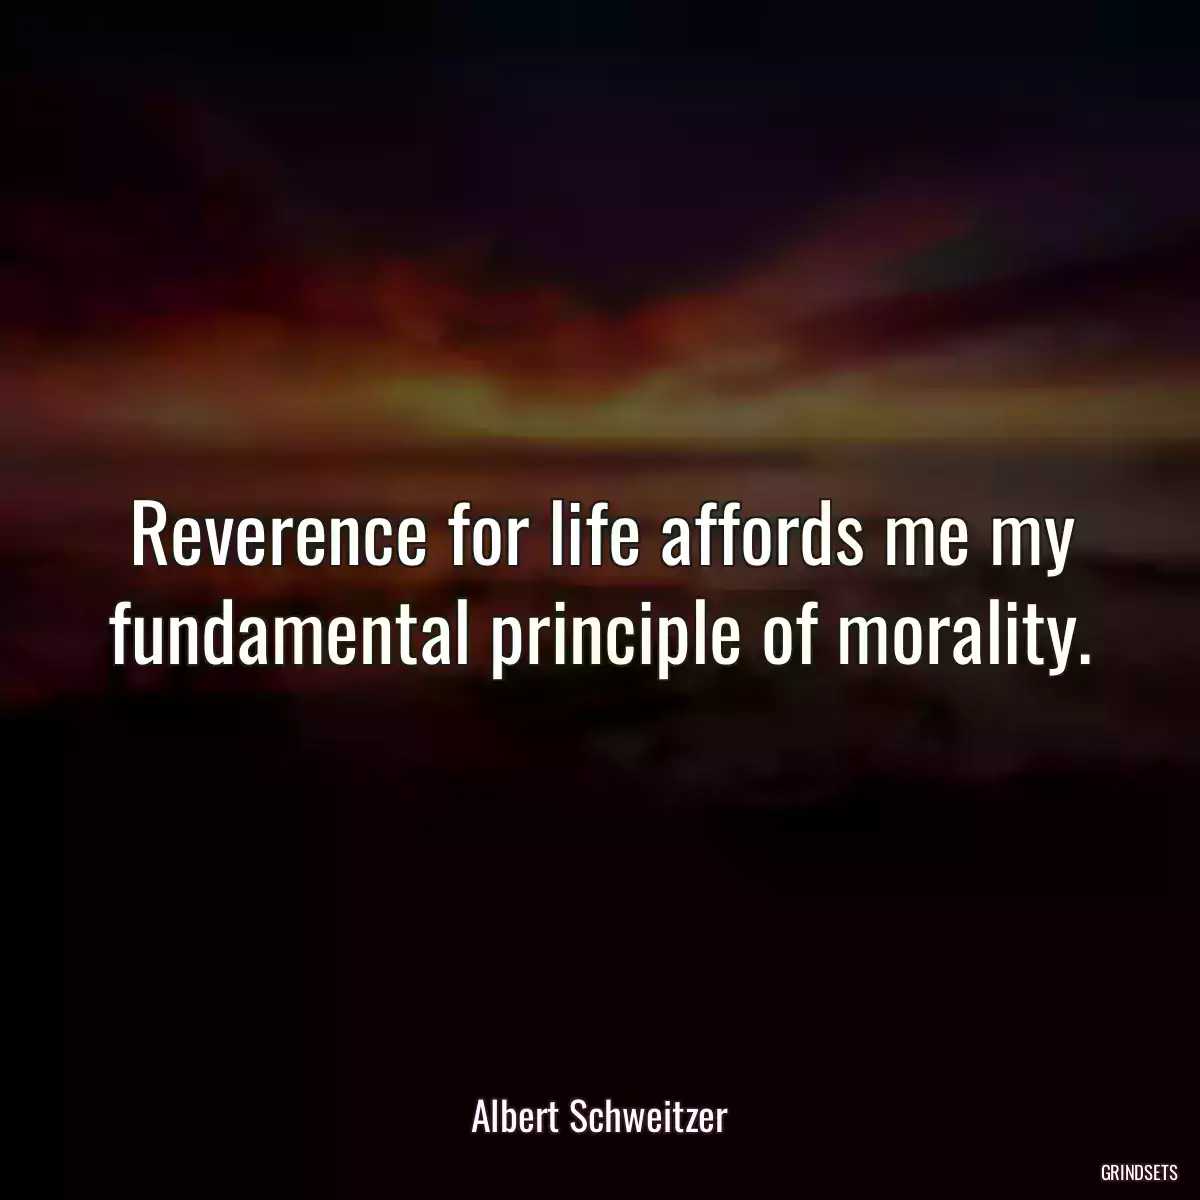 Reverence for life affords me my fundamental principle of morality.